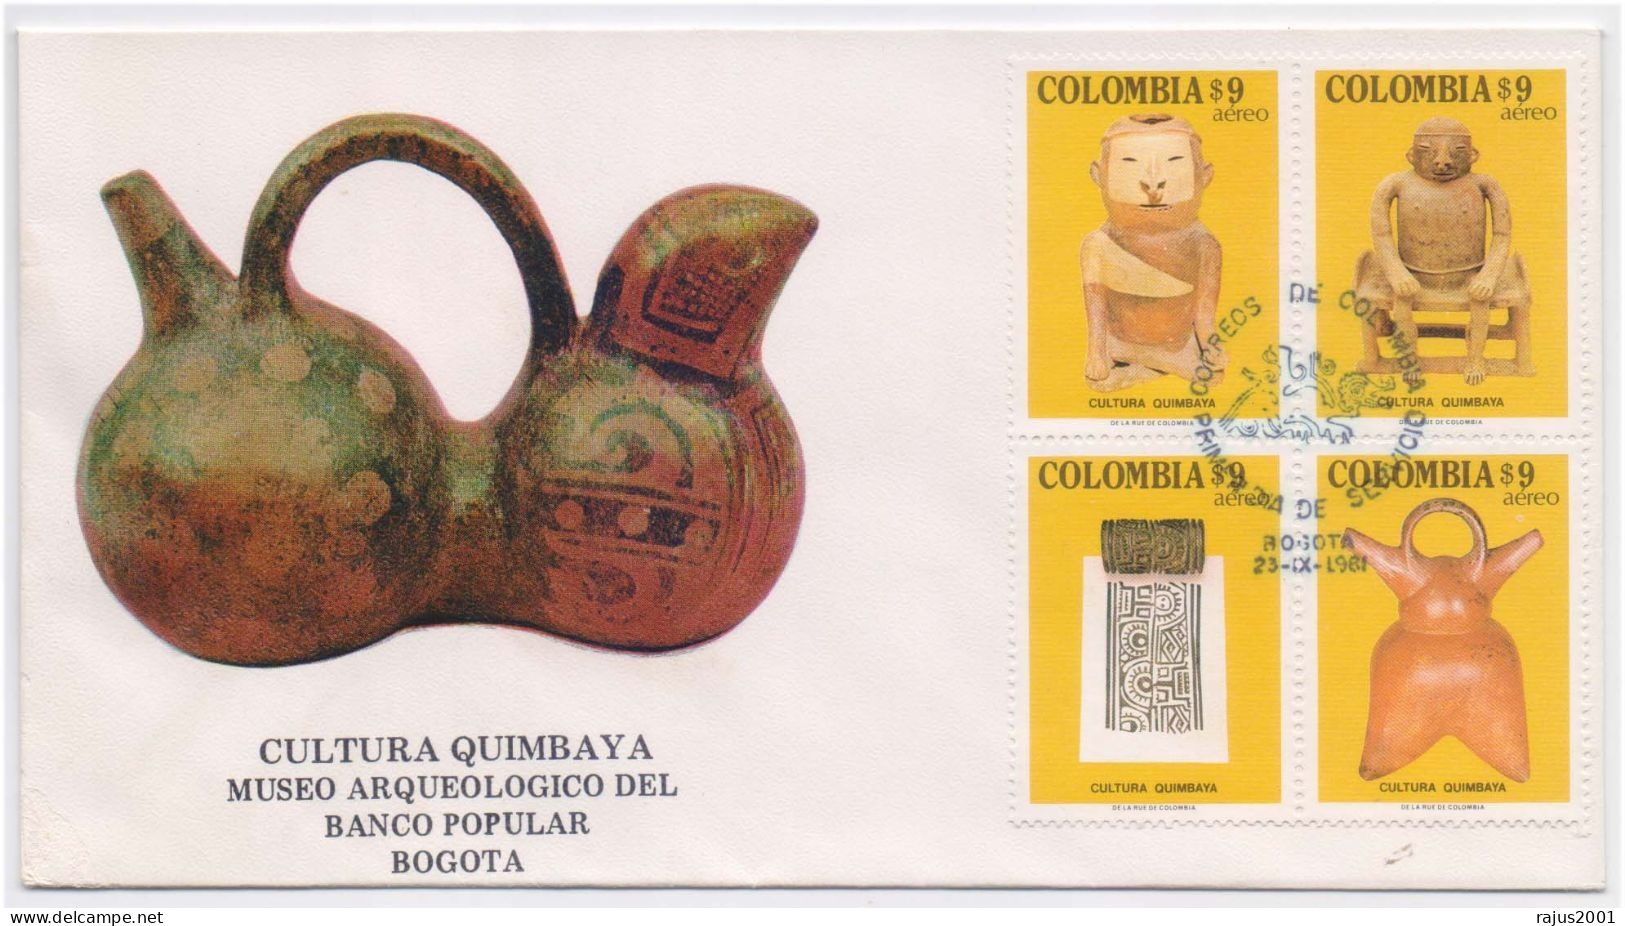 Culture Quimbaya, Archaeological Museum, Archaeology, Indigenous Indian Handicrafts, Sculpture, Colombia FDC - Archäologie